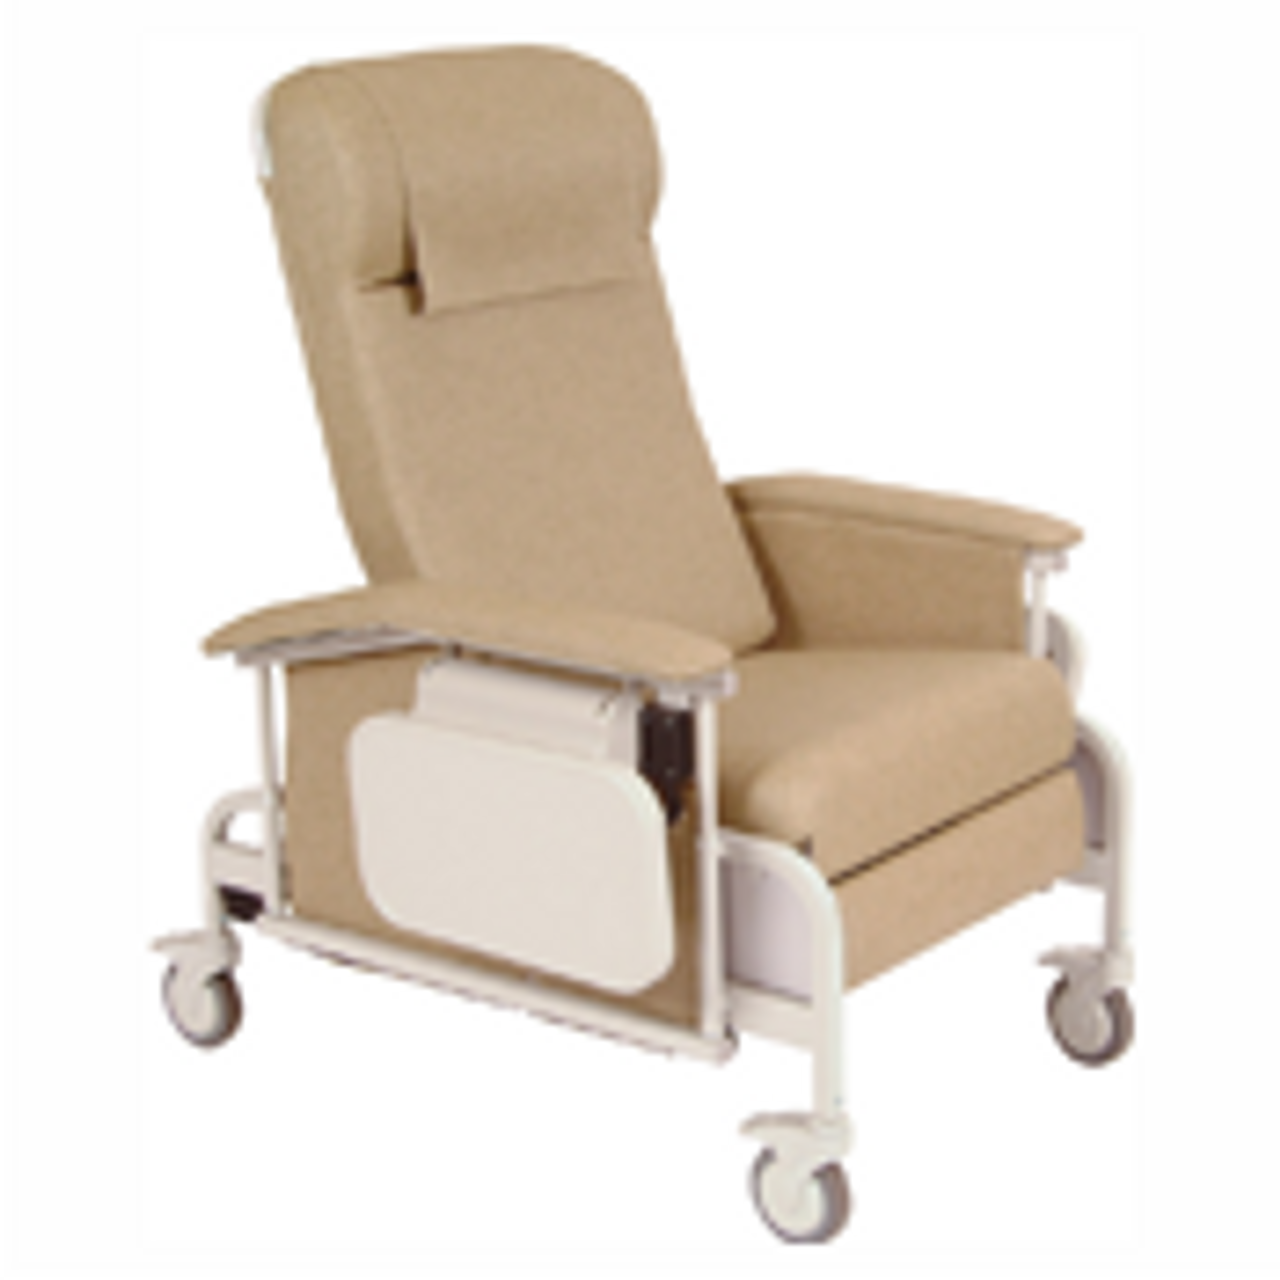 Clinical and Infusion Chairs